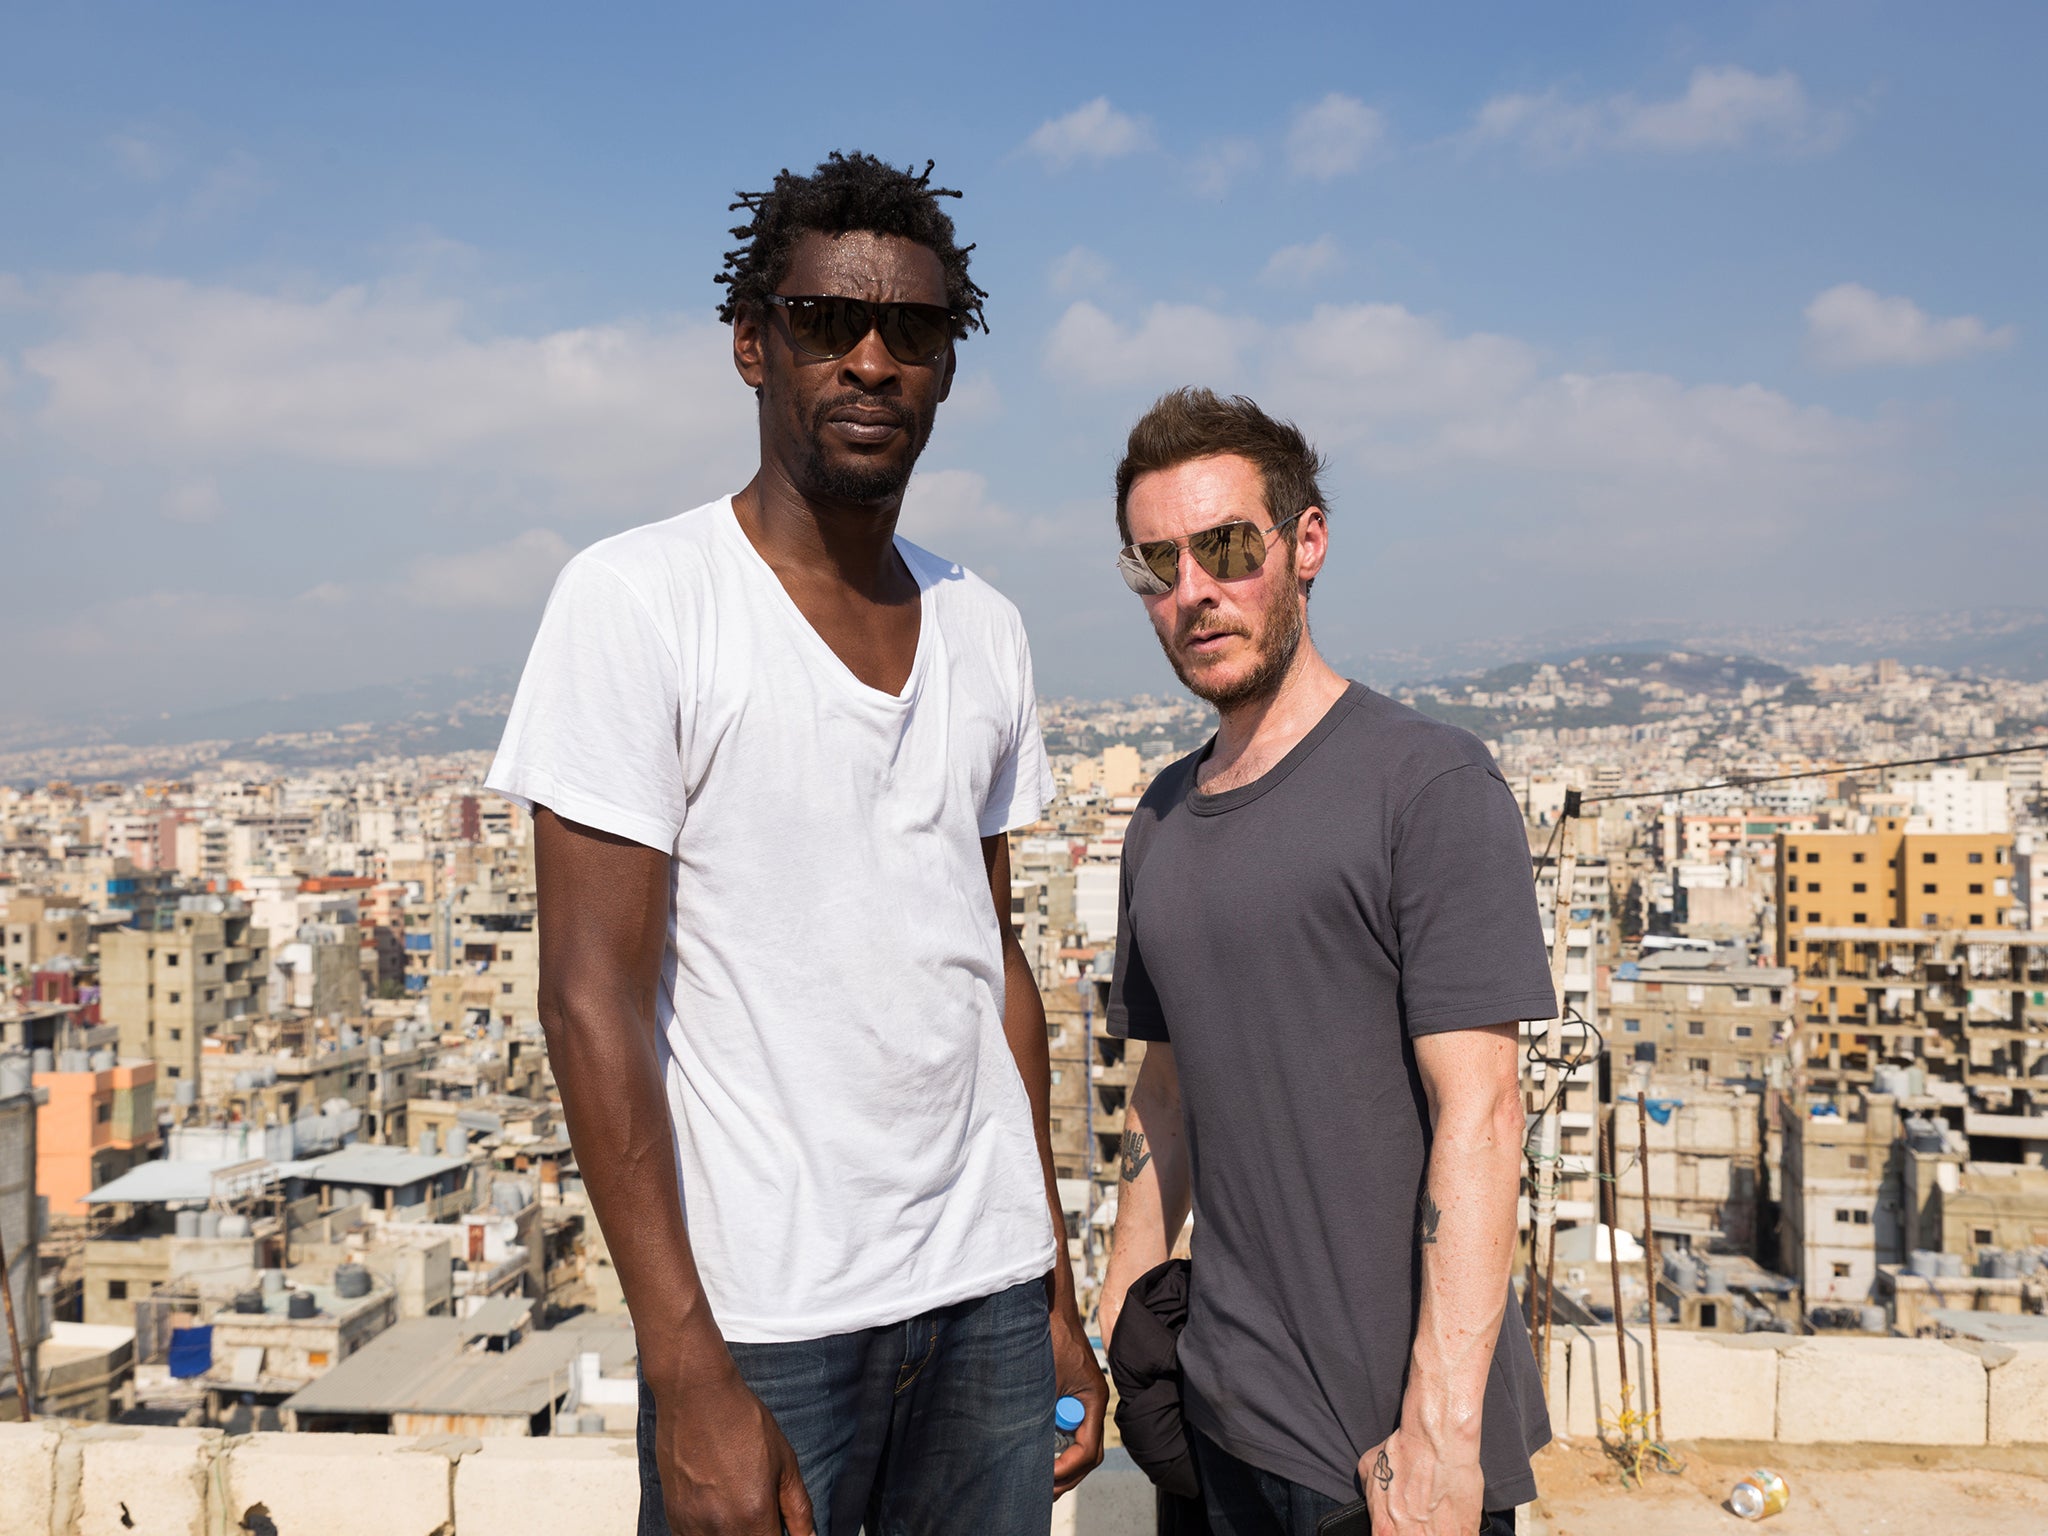 Massive Attack: ‘Any protest we make alone as one band will not make a meaningful difference’